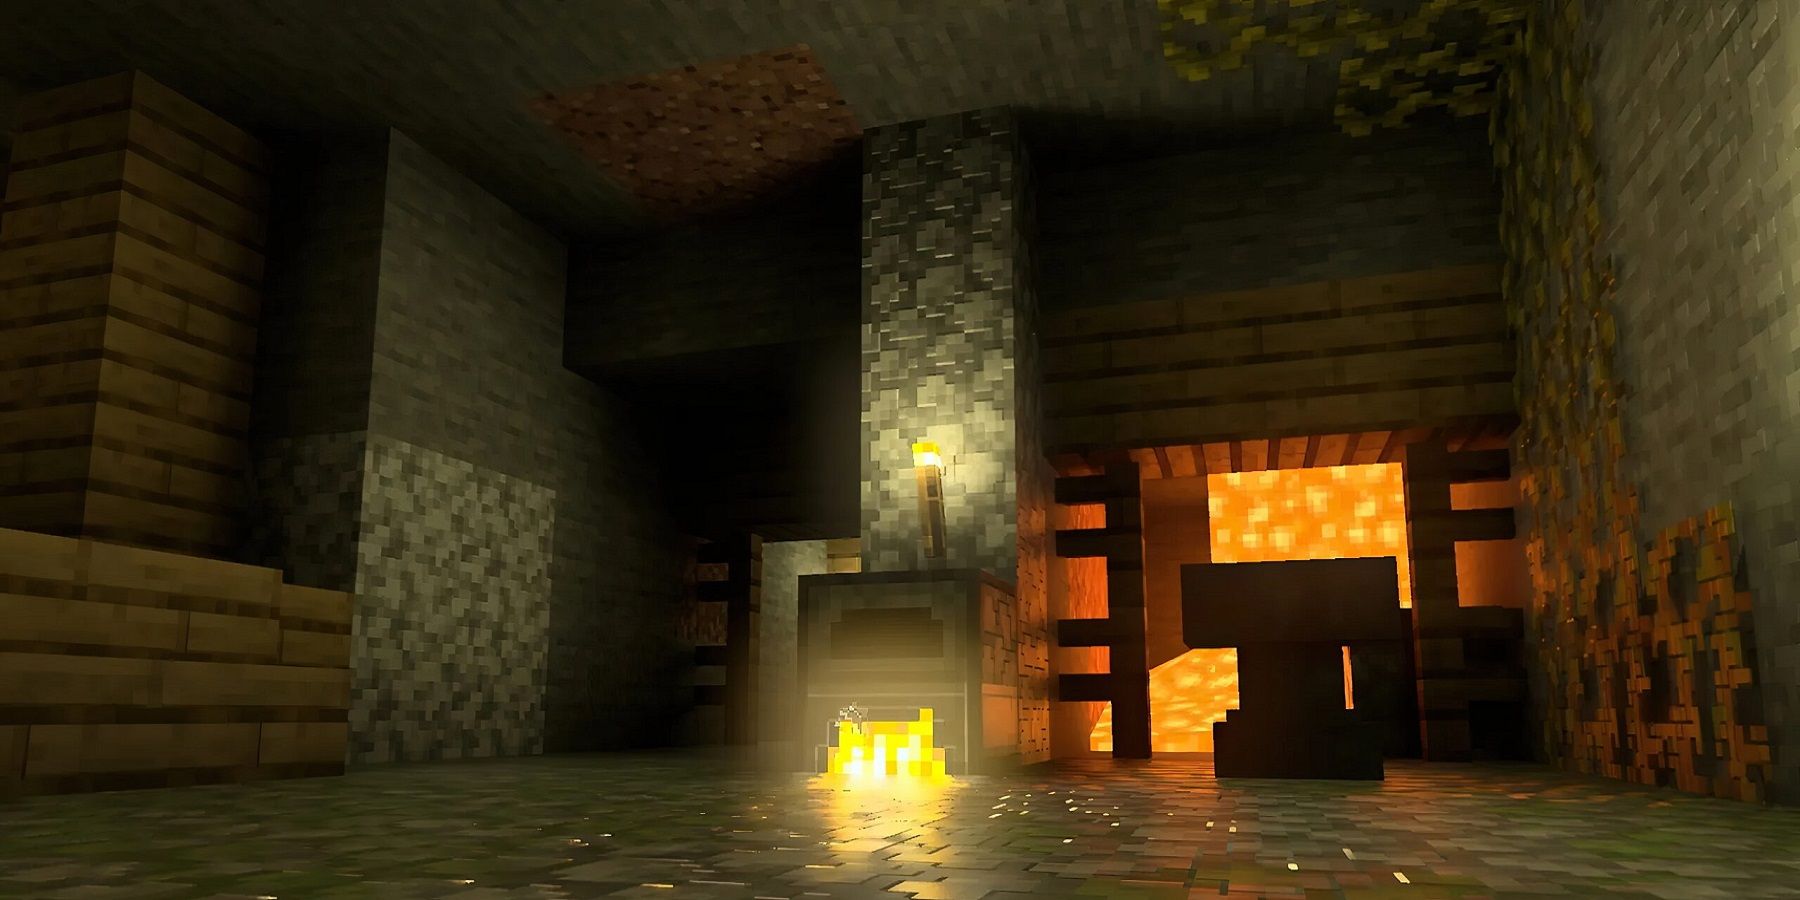 Java and Bedrock editions merge, creating one Minecraft to rule